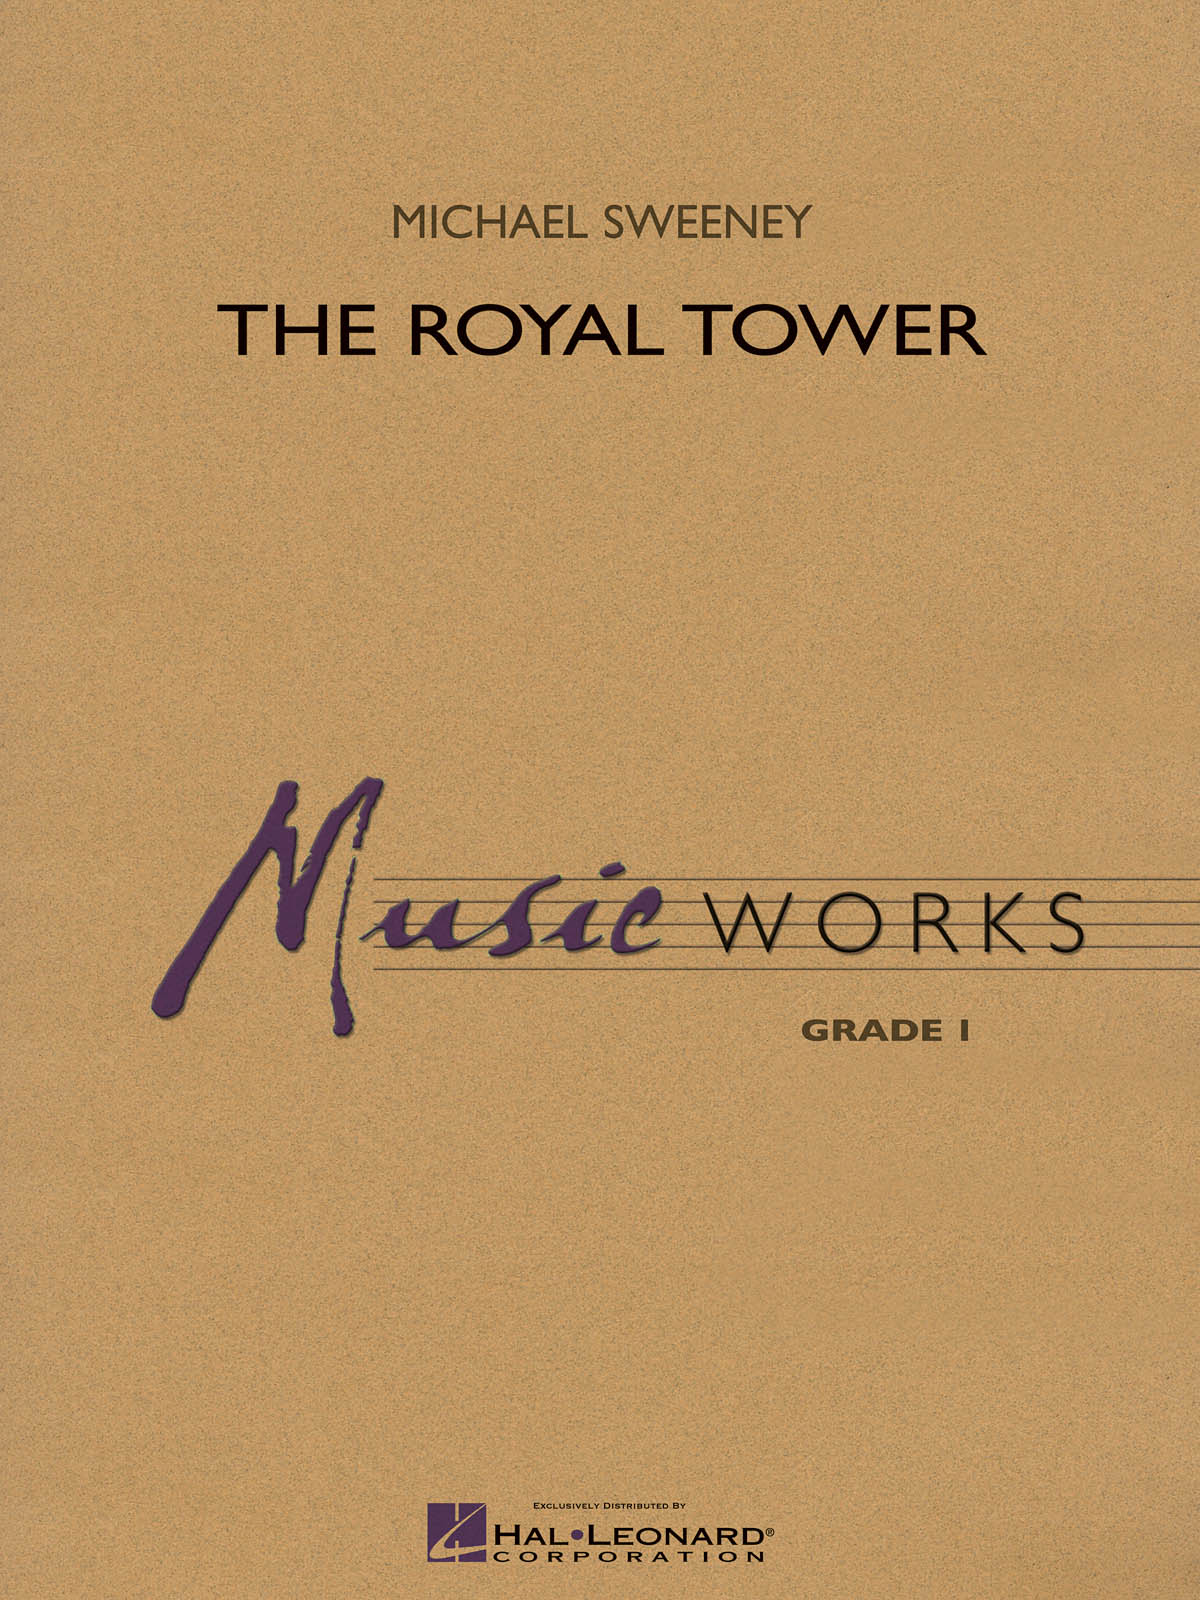 Michael Sweeney: The Royal Tower